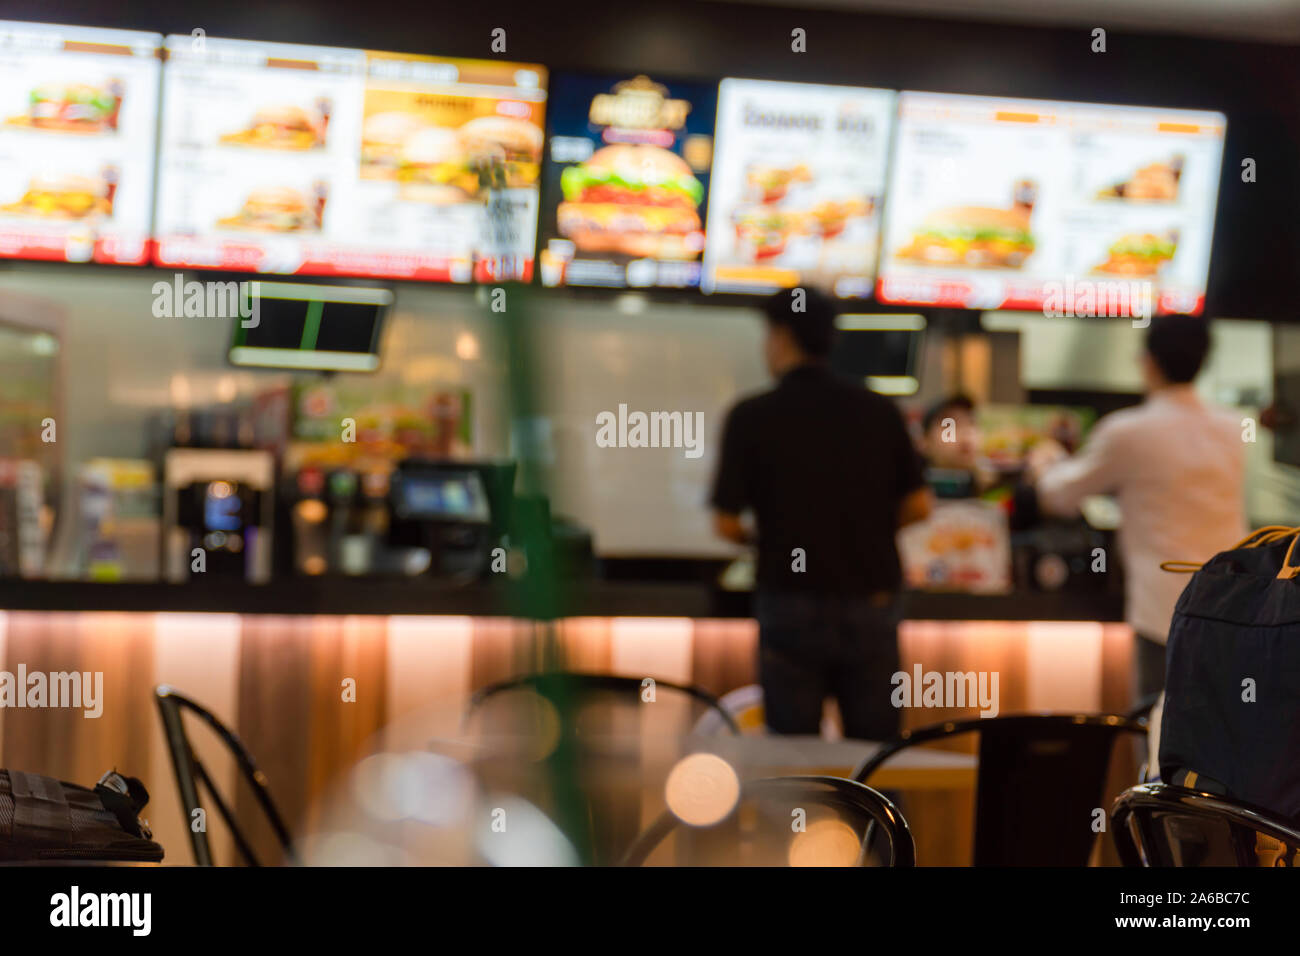 Blurred image of a fast food restaurant, also known as a quick service restaurant within the airport. Stock Photo